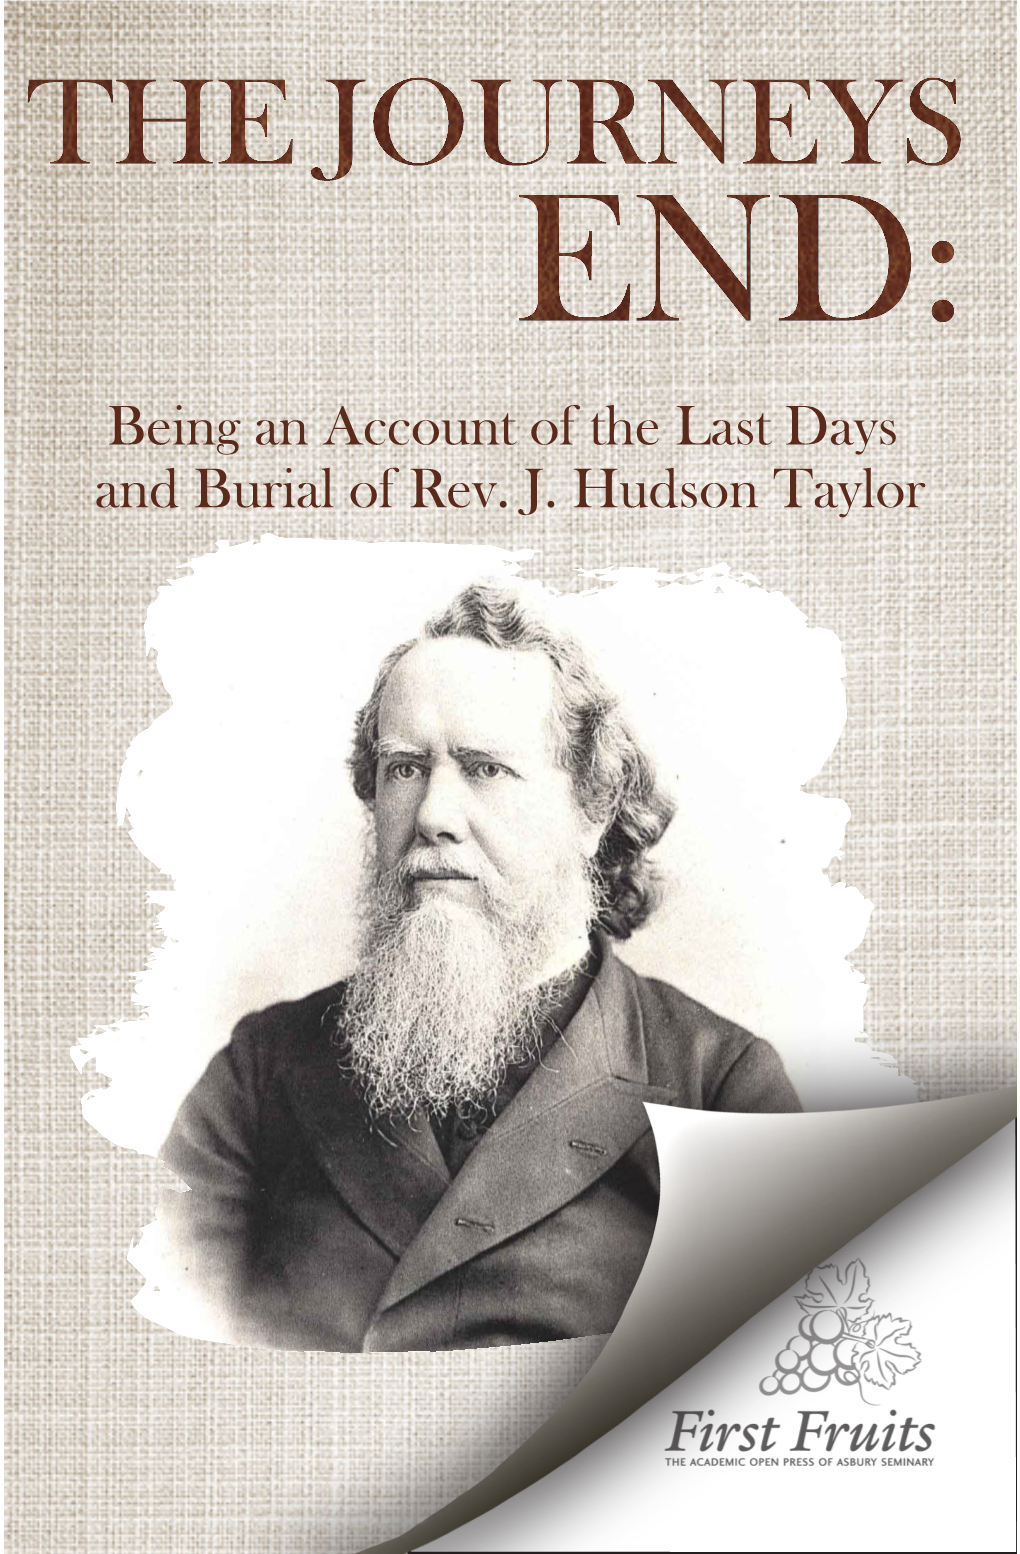 Being an Account of the Last Days and Burial of Rev. J. Hudson Taylor